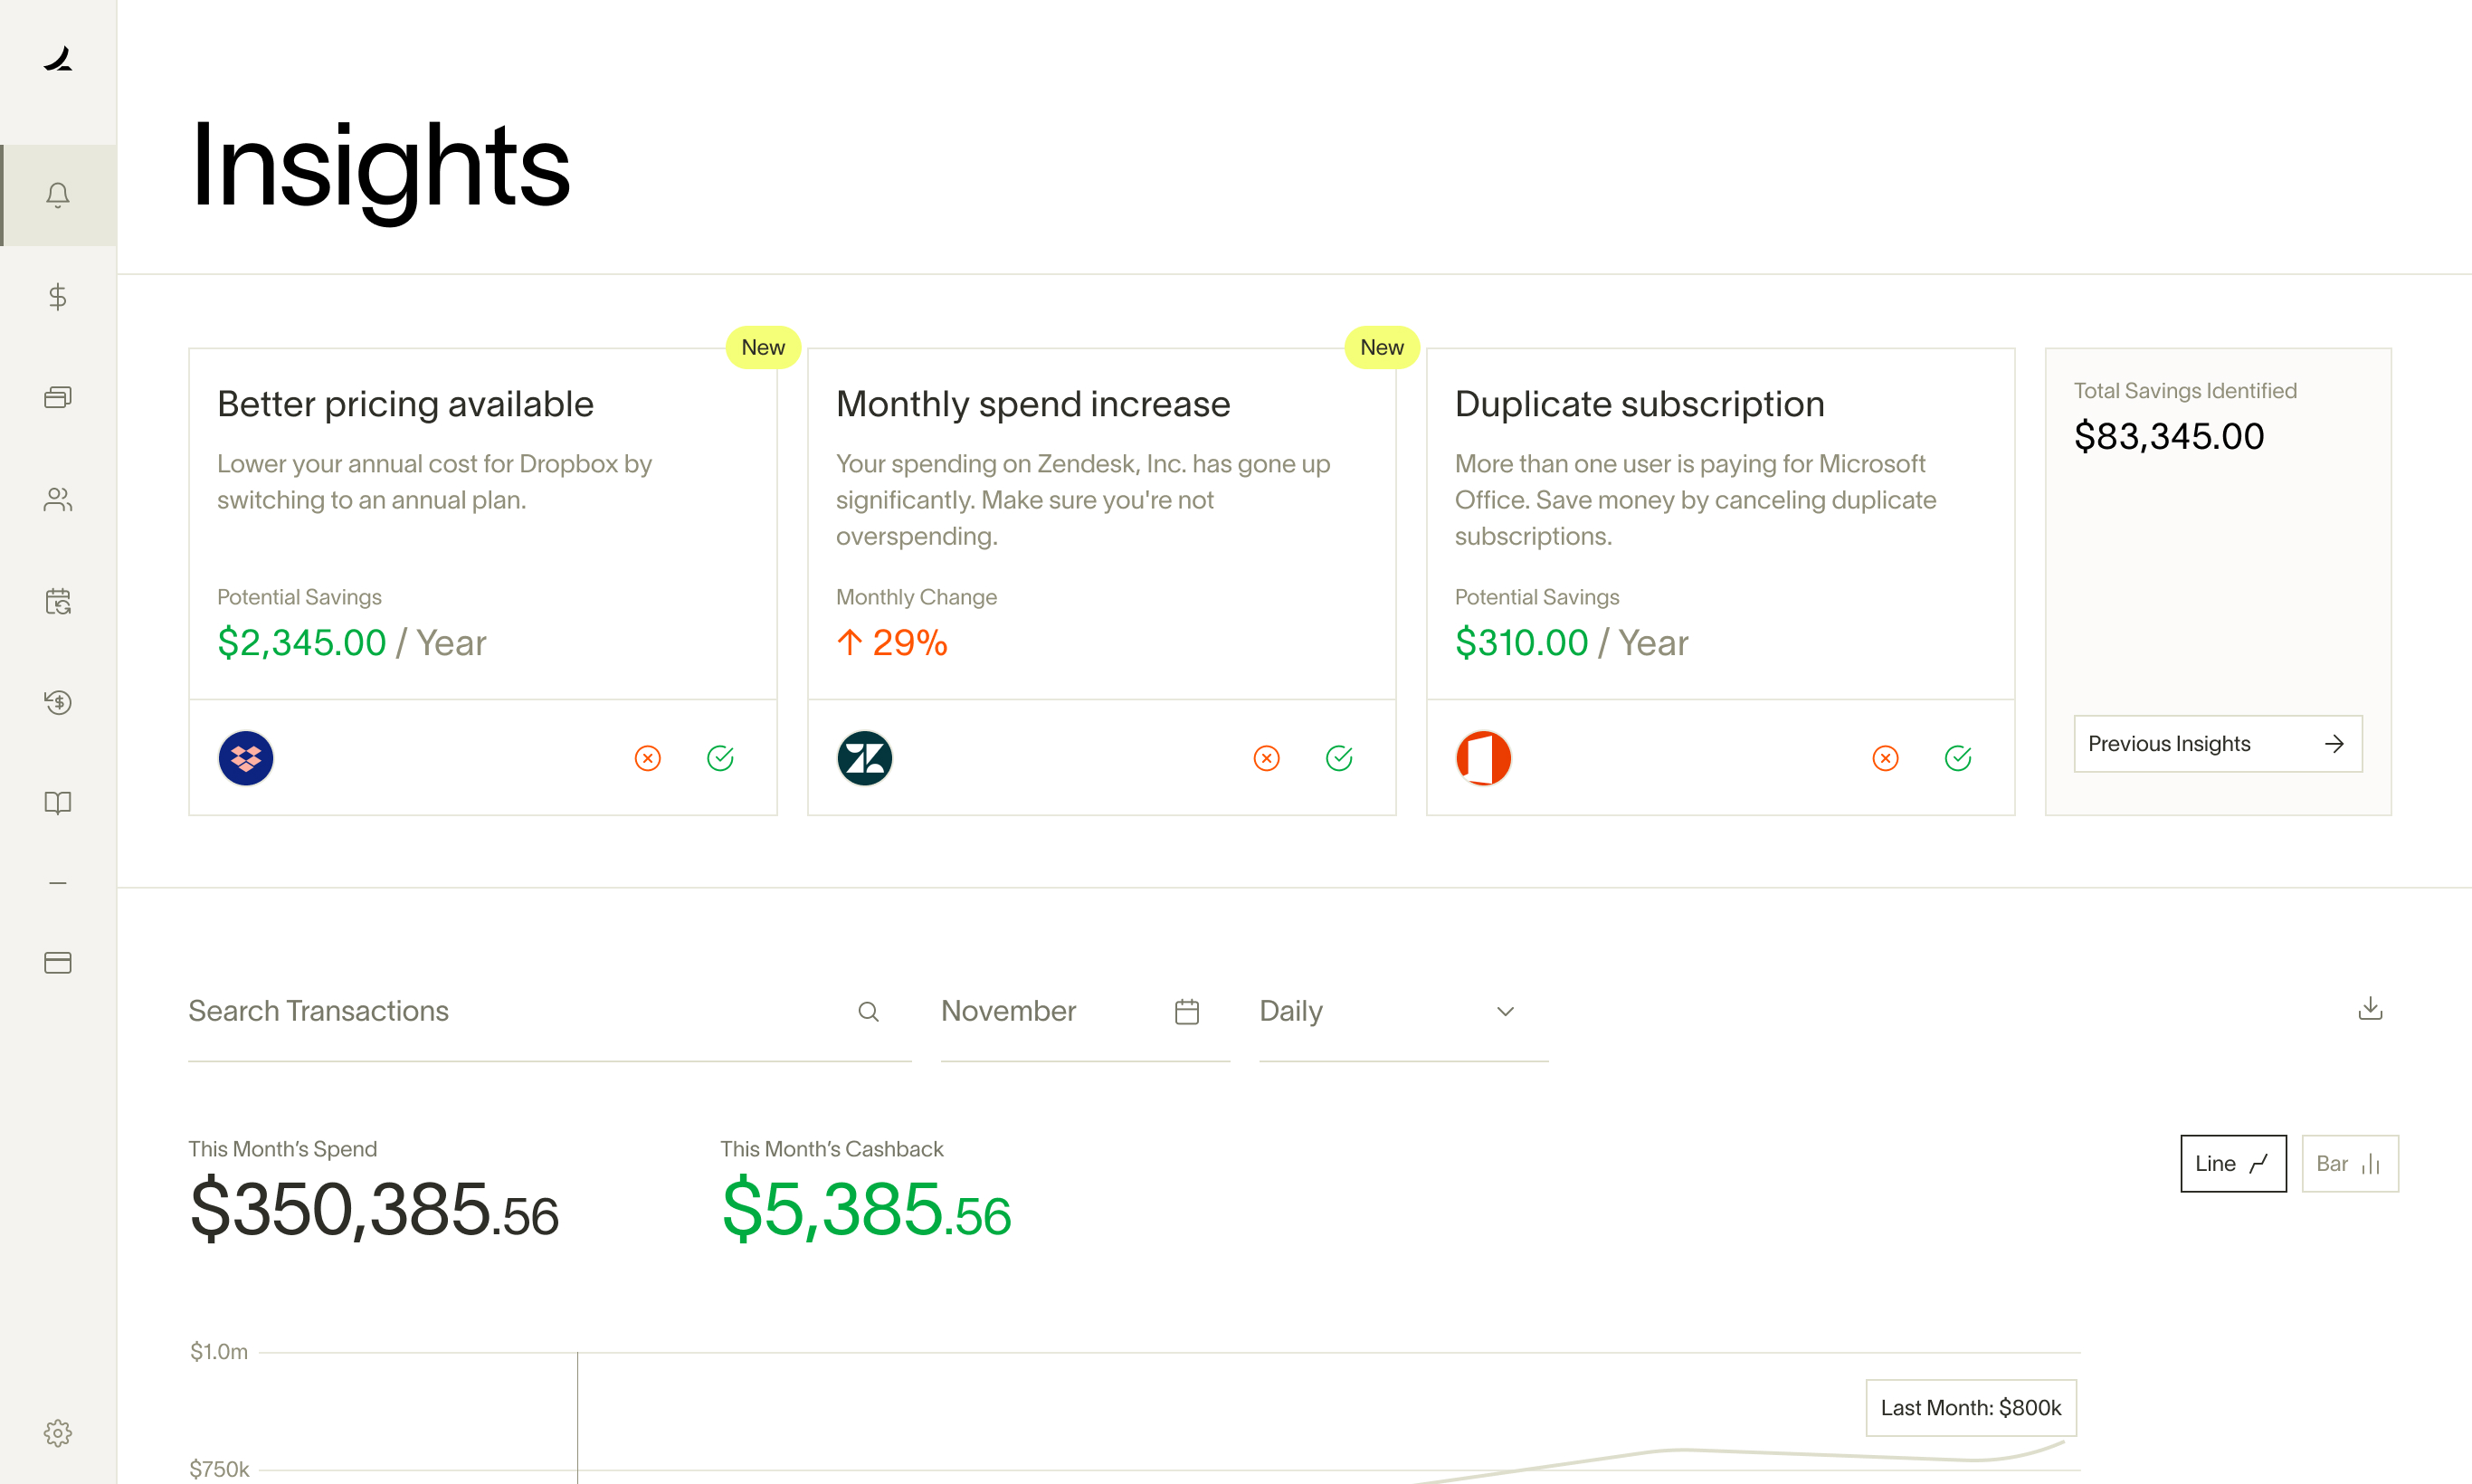 Real-time reporting so you know exactly how much your team is spending at any time. Automatically generated savings insights so you can reduce your expenses with just a few clicks.